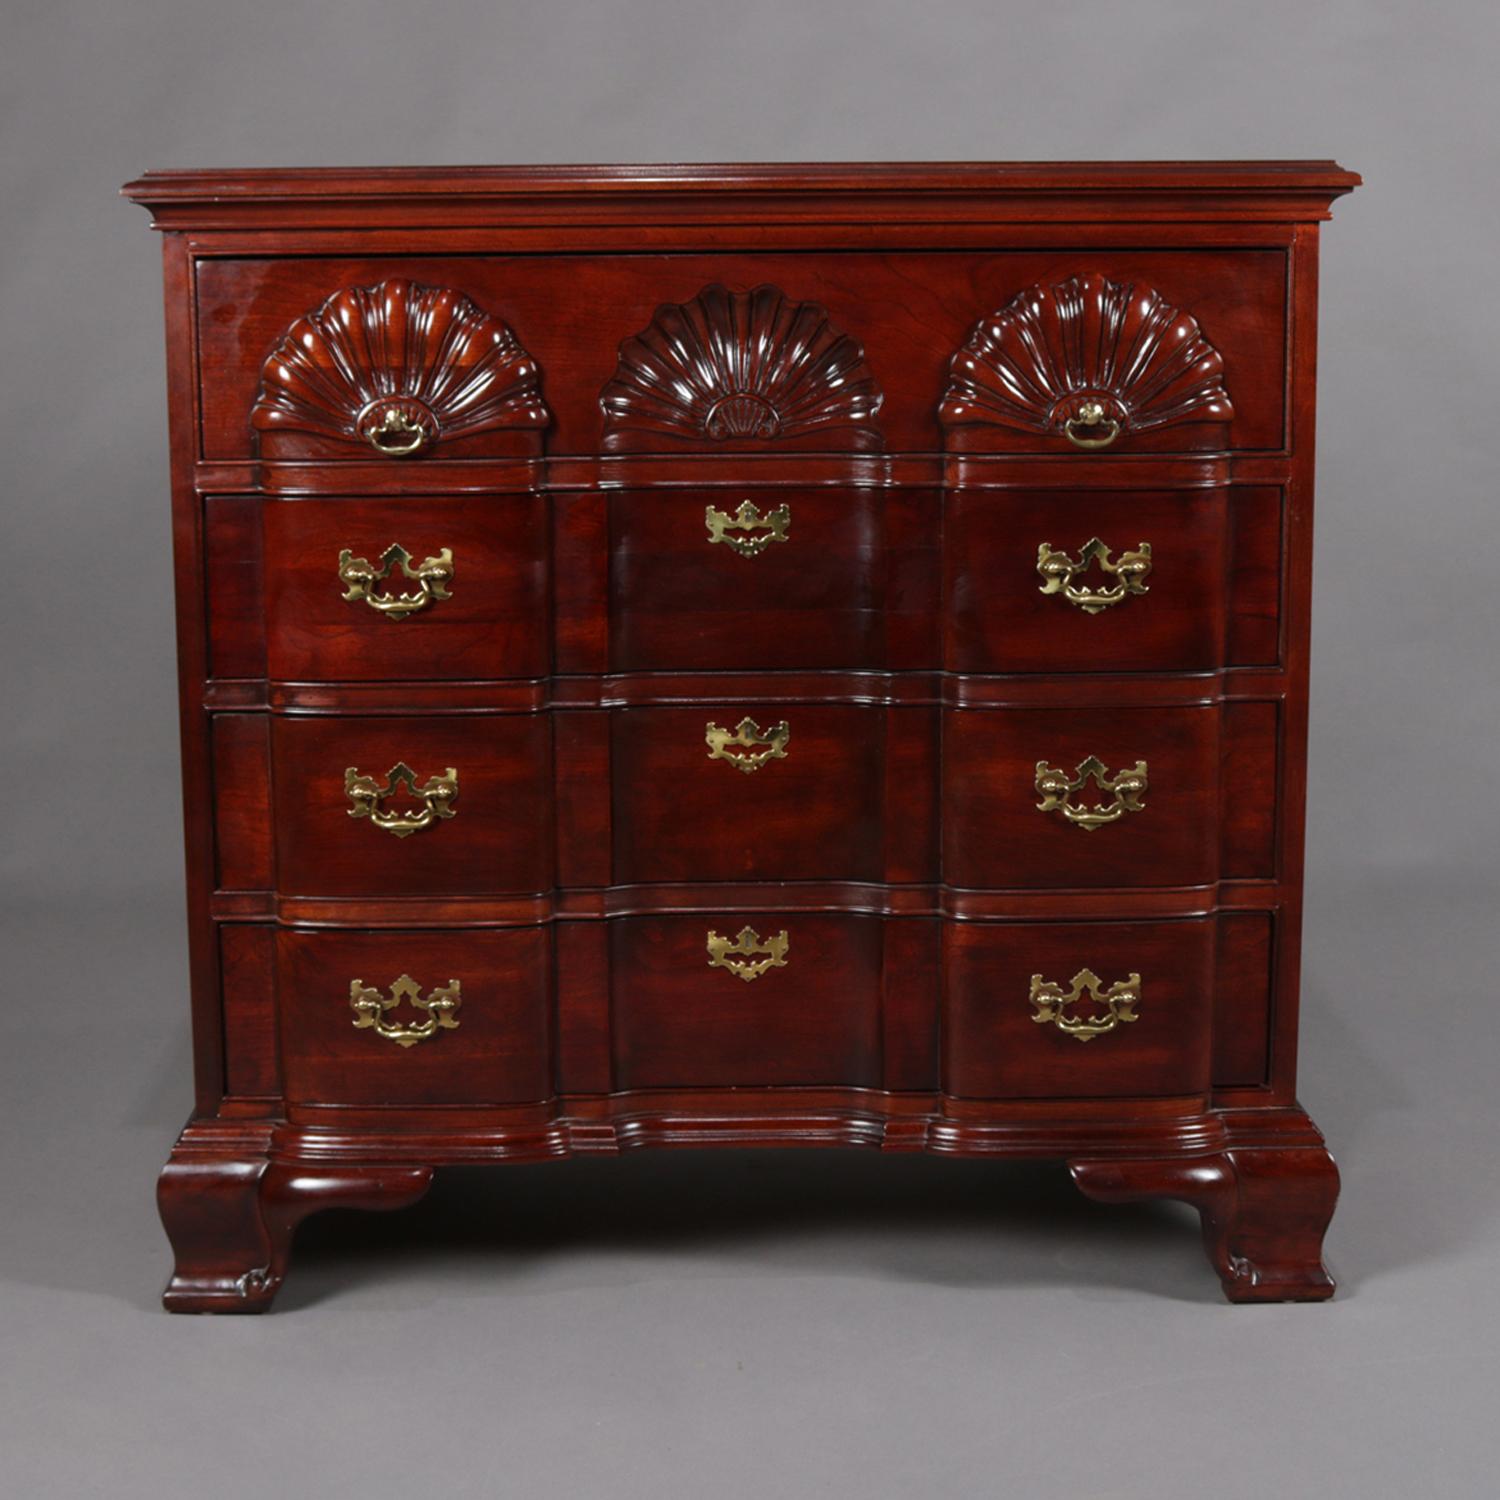 Chippendale style mahogany dresser features block front design with four long drawers, the top drawer having convex flanked by concave carved shell designs, seated on bracket feet and having brass pulls, original Lineage label plaque on drawer